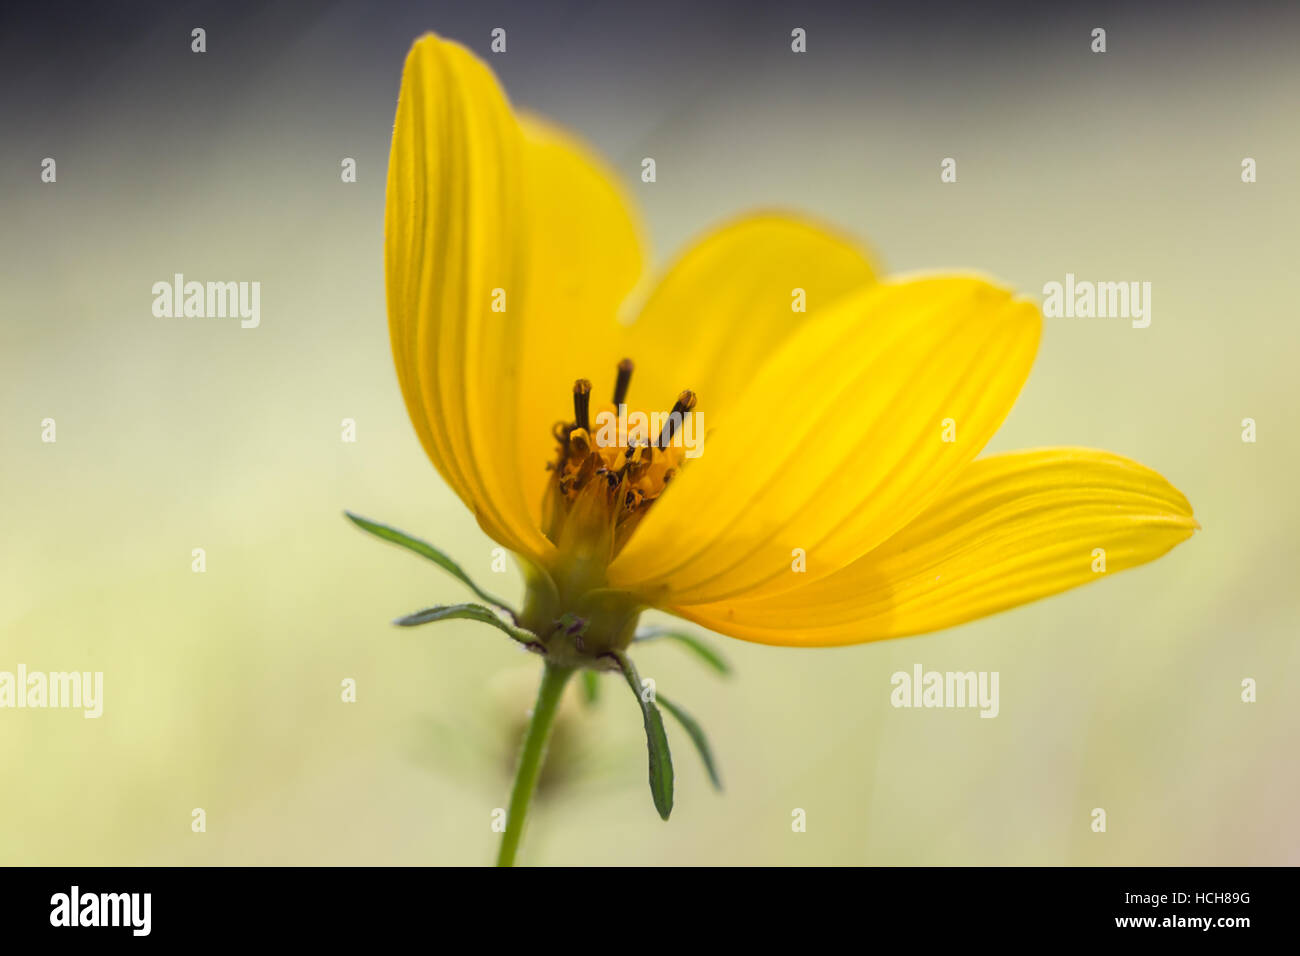 Small yellow flower with textured petals with a gap showing the center of the flower Stock Photo